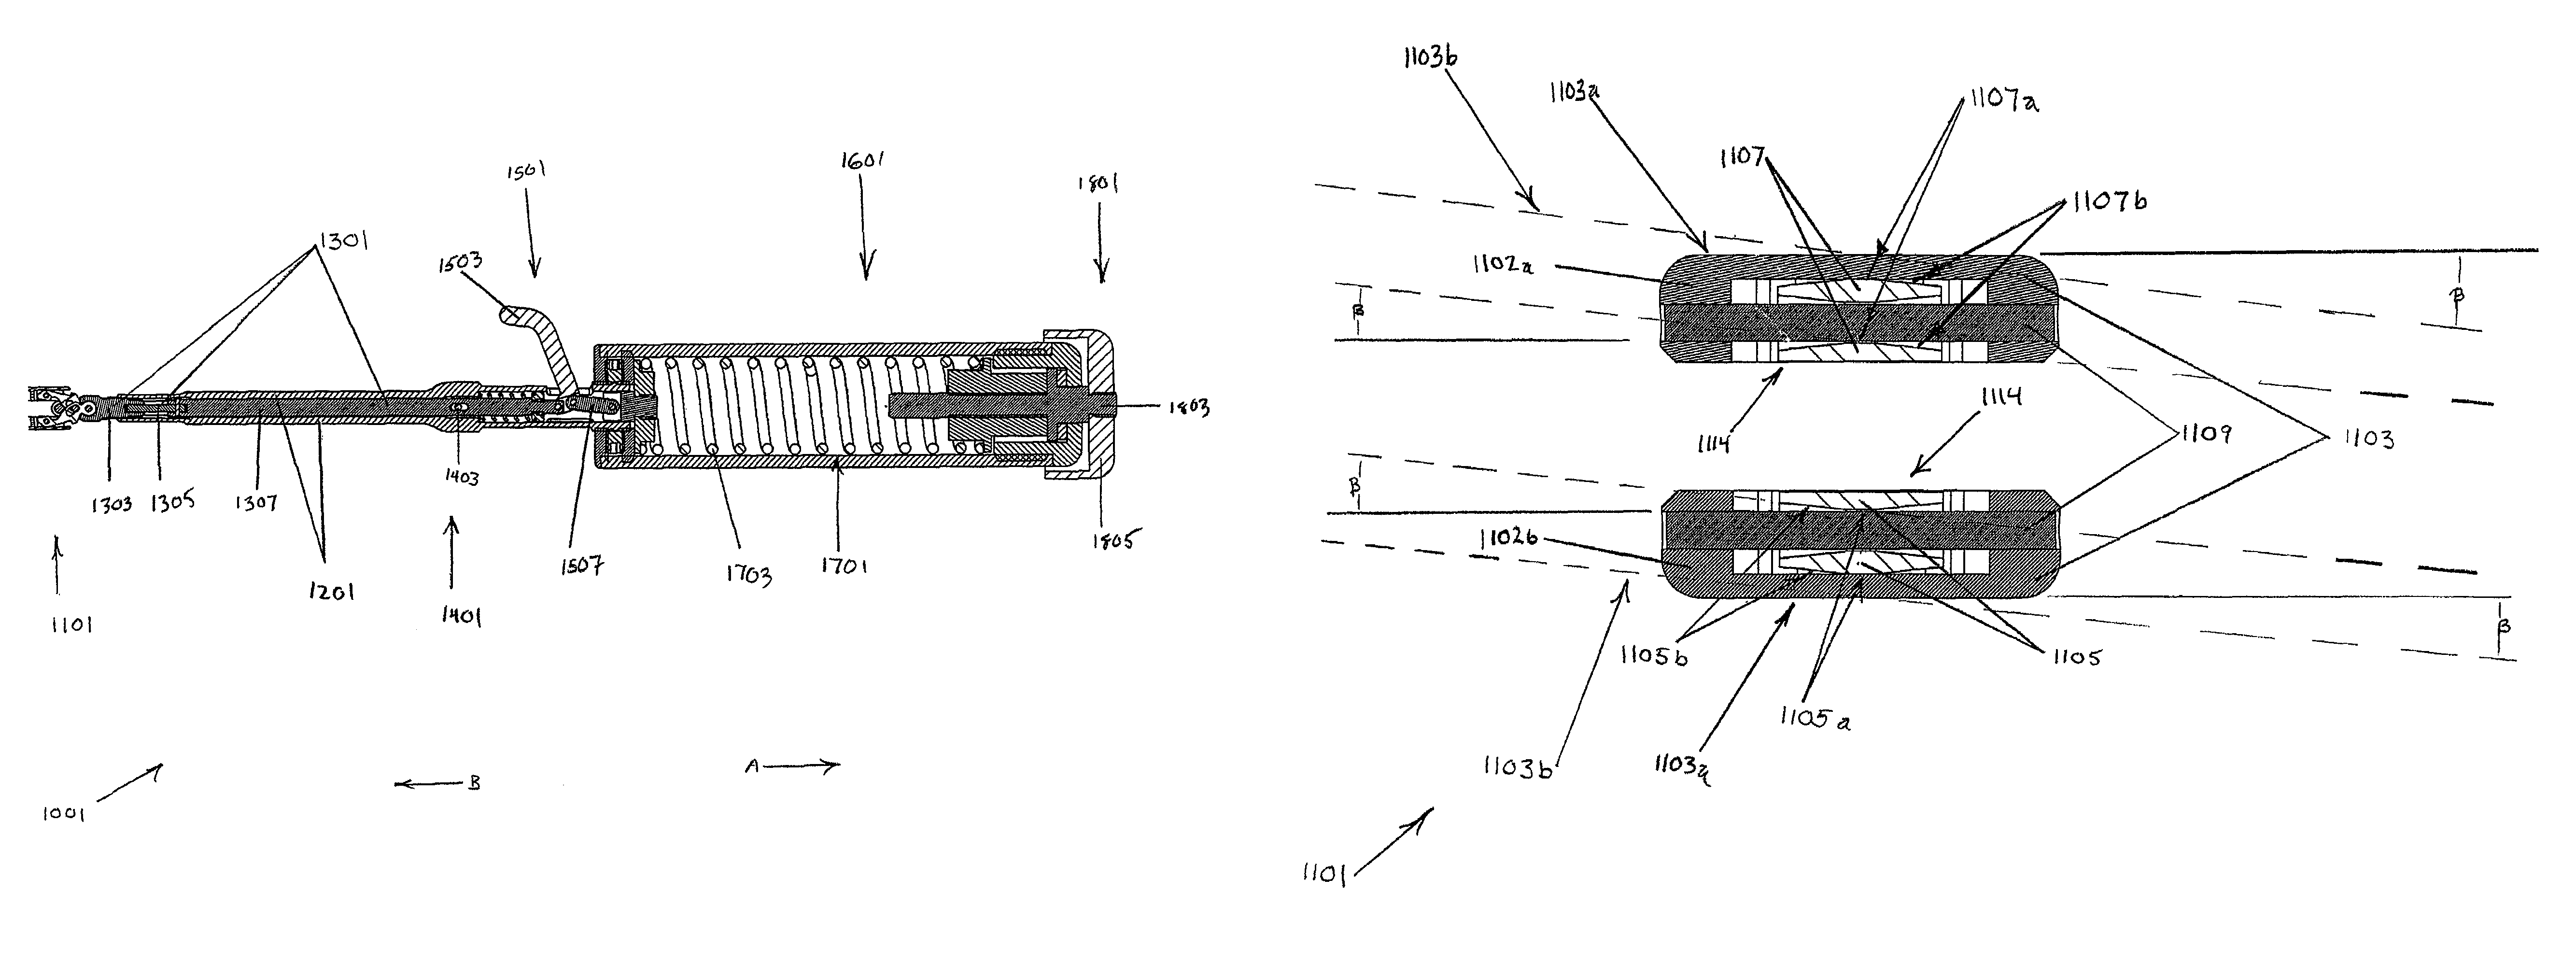 Intervertebral disc space sizing tools and methods